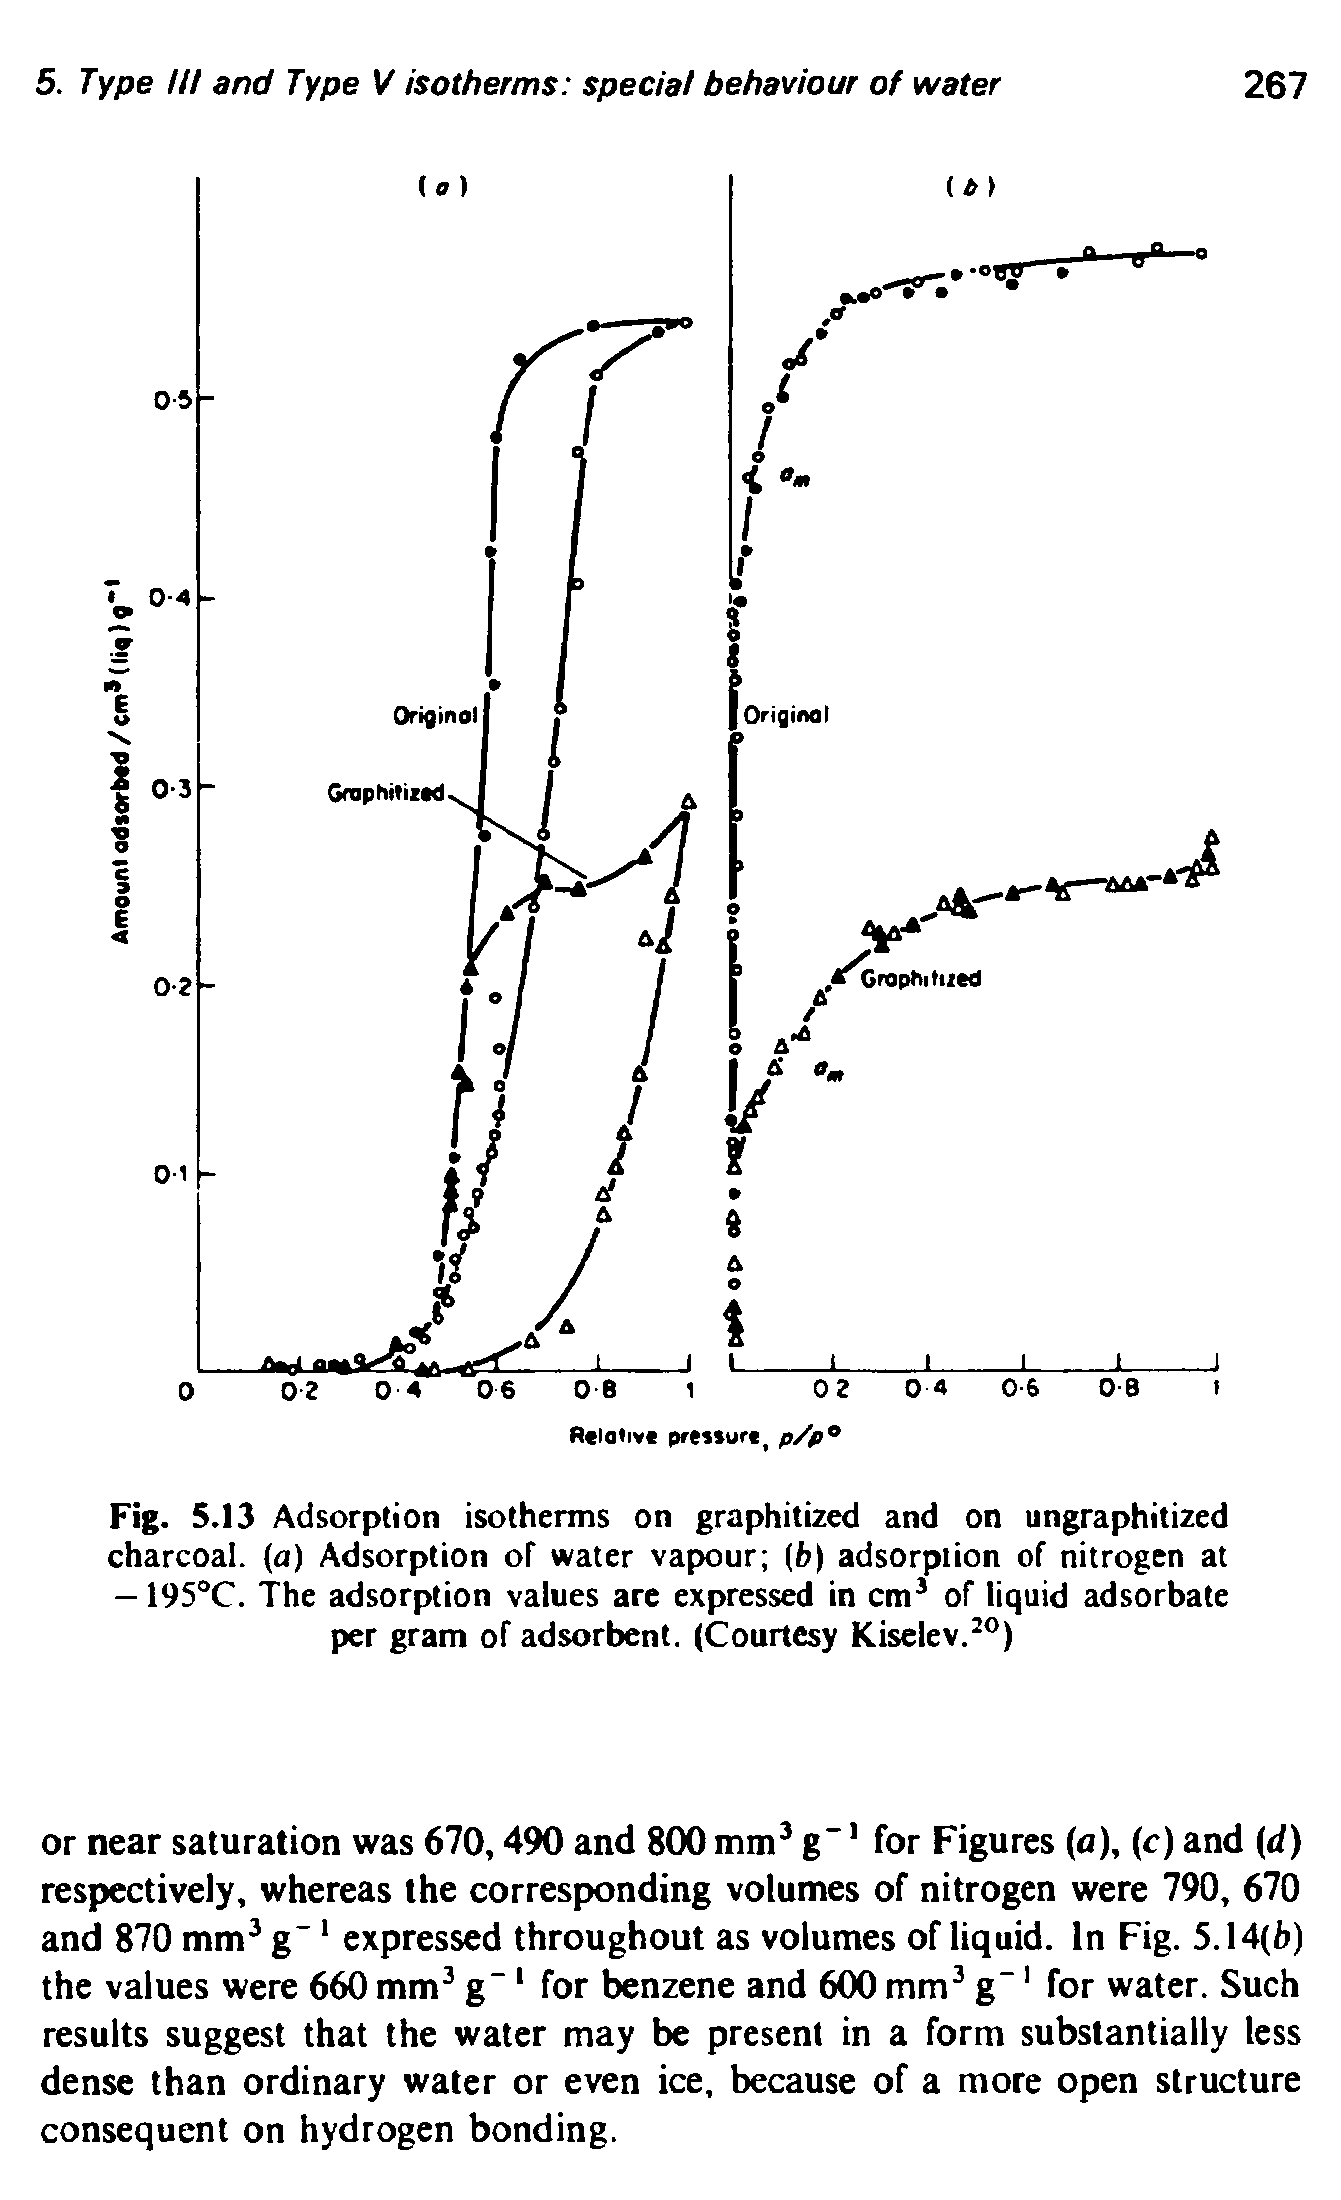 Fig. 5.13 Adsorption isotherms on graphitized and on ungraphitized charcoal, (a) Adsorption of water vapour (fc) adsorption of nitrogen at — 195°C. The adsorption values are expressed in cm of liquid adsorbate per gram of adsorbent. (Courtesy Kiselev. )...